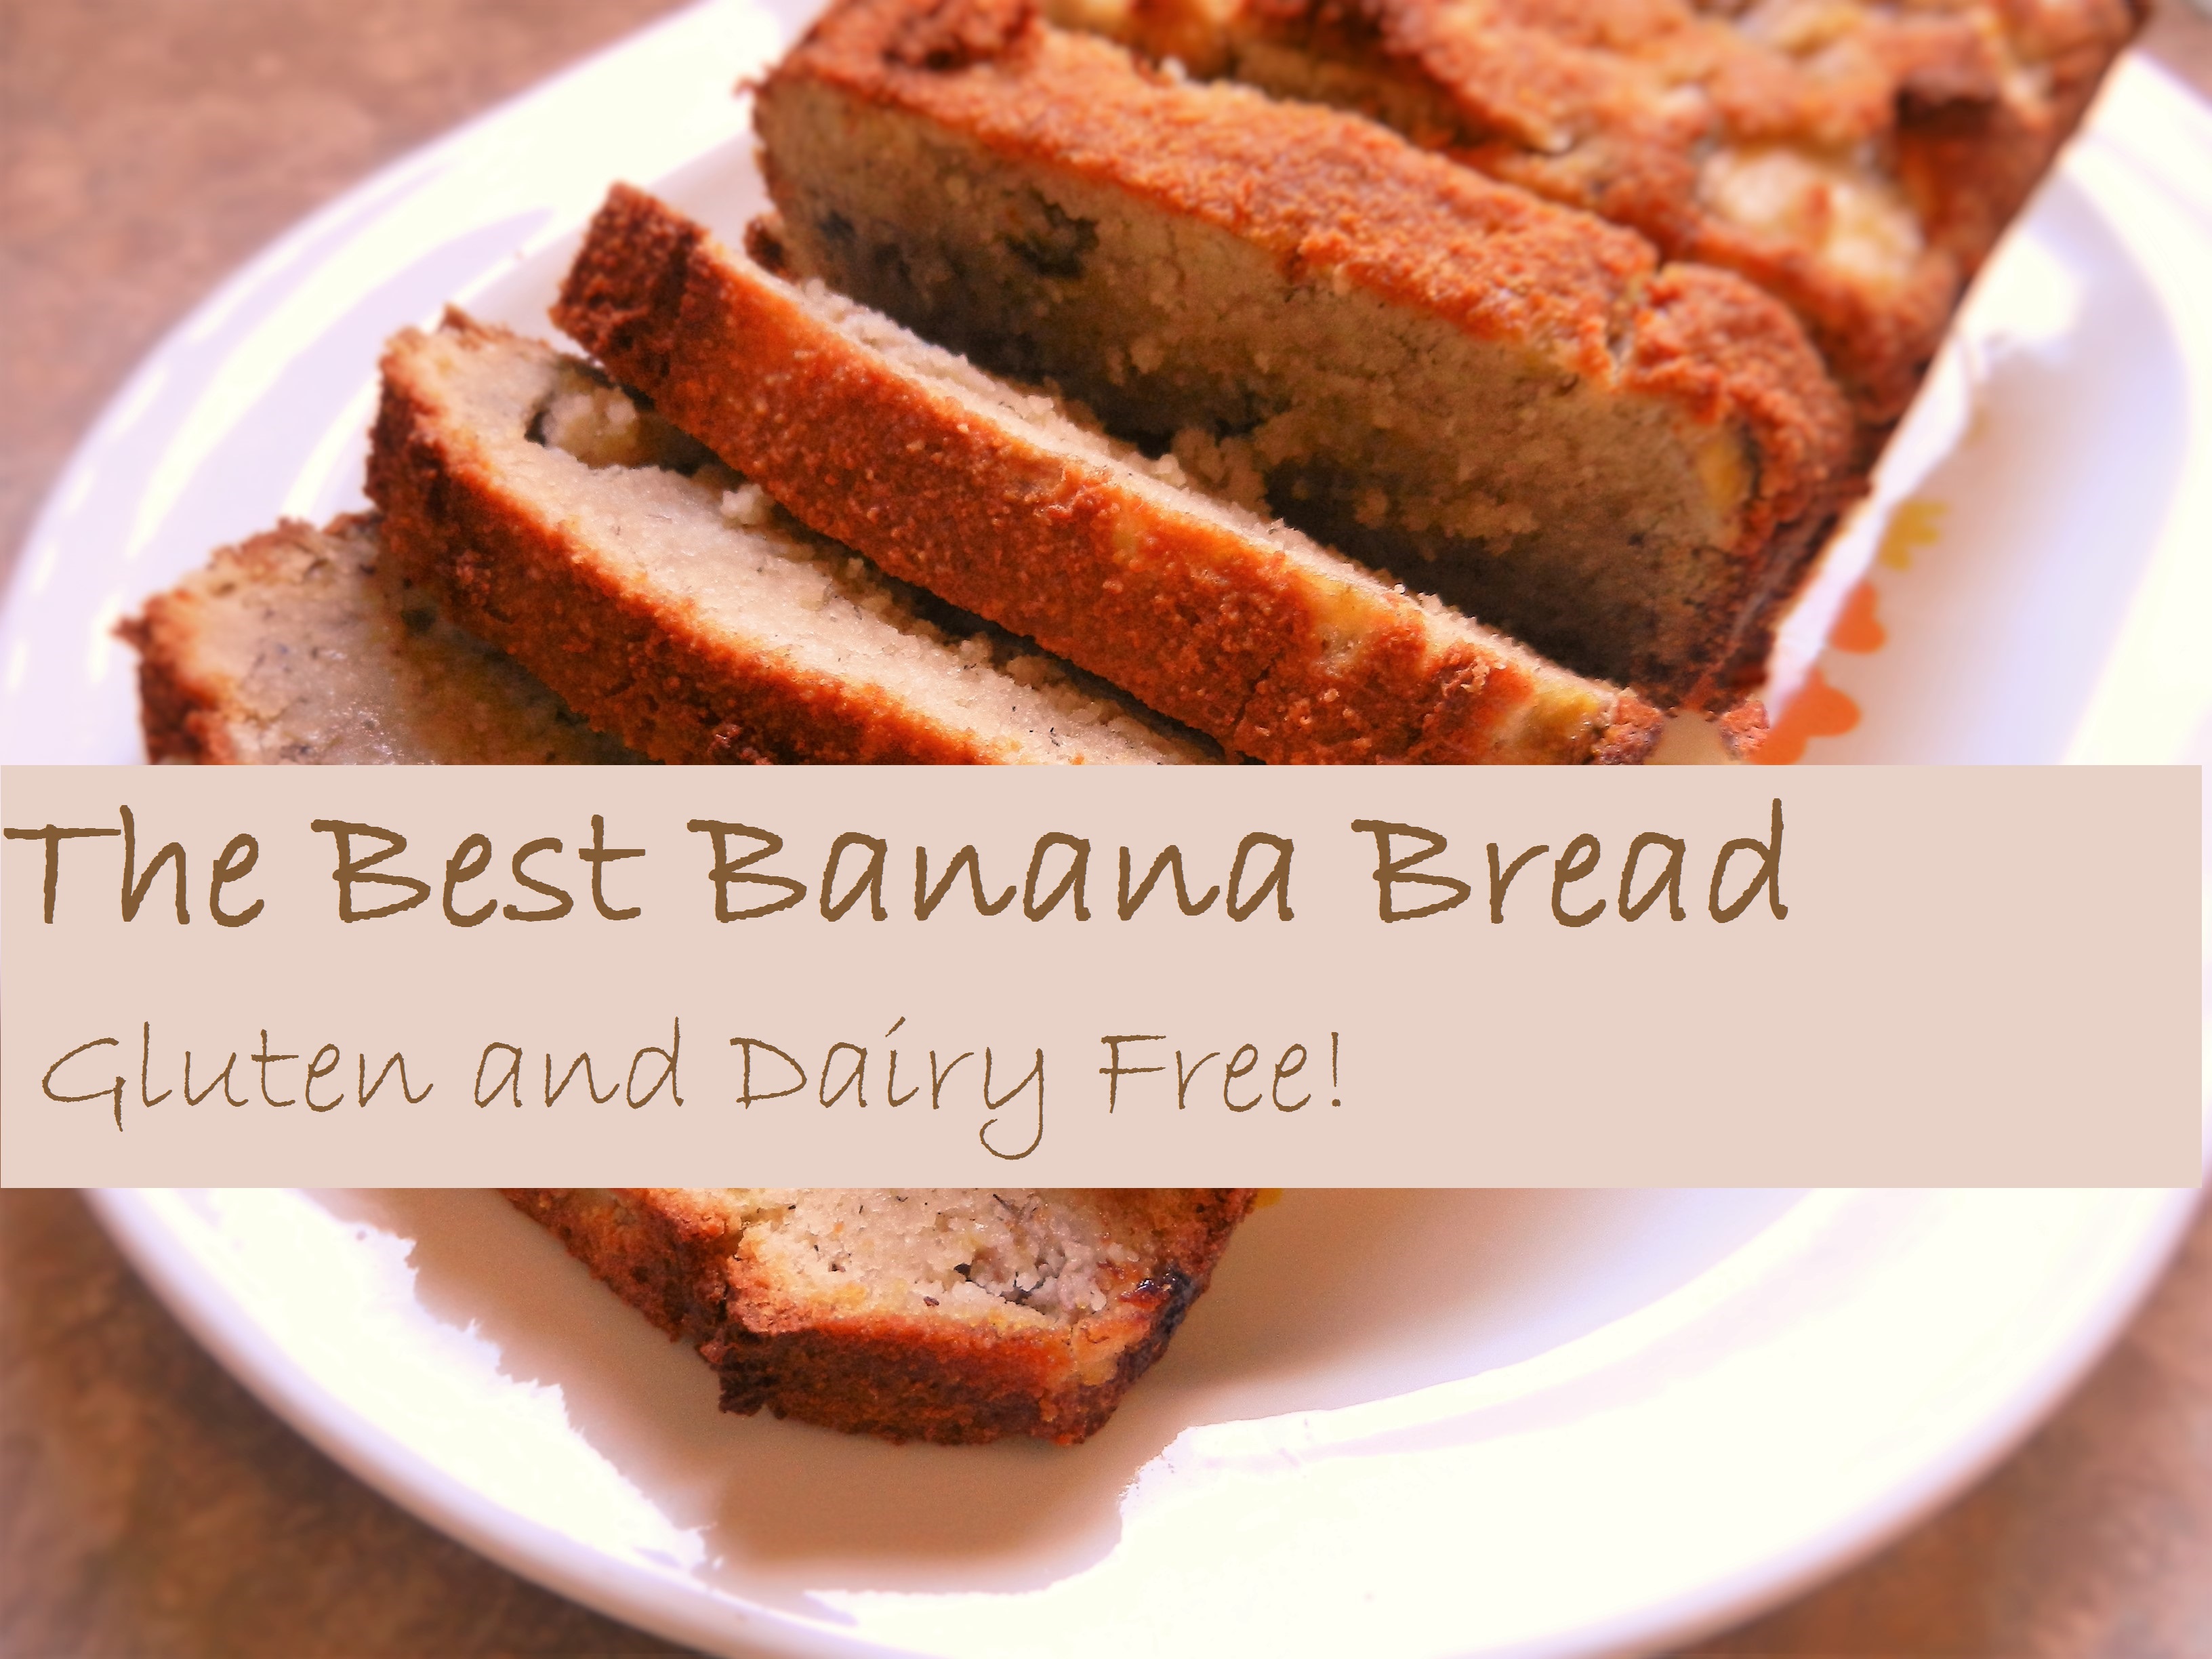 The Best Banana Bread – Gluten and Dairy Free (Grain Free)